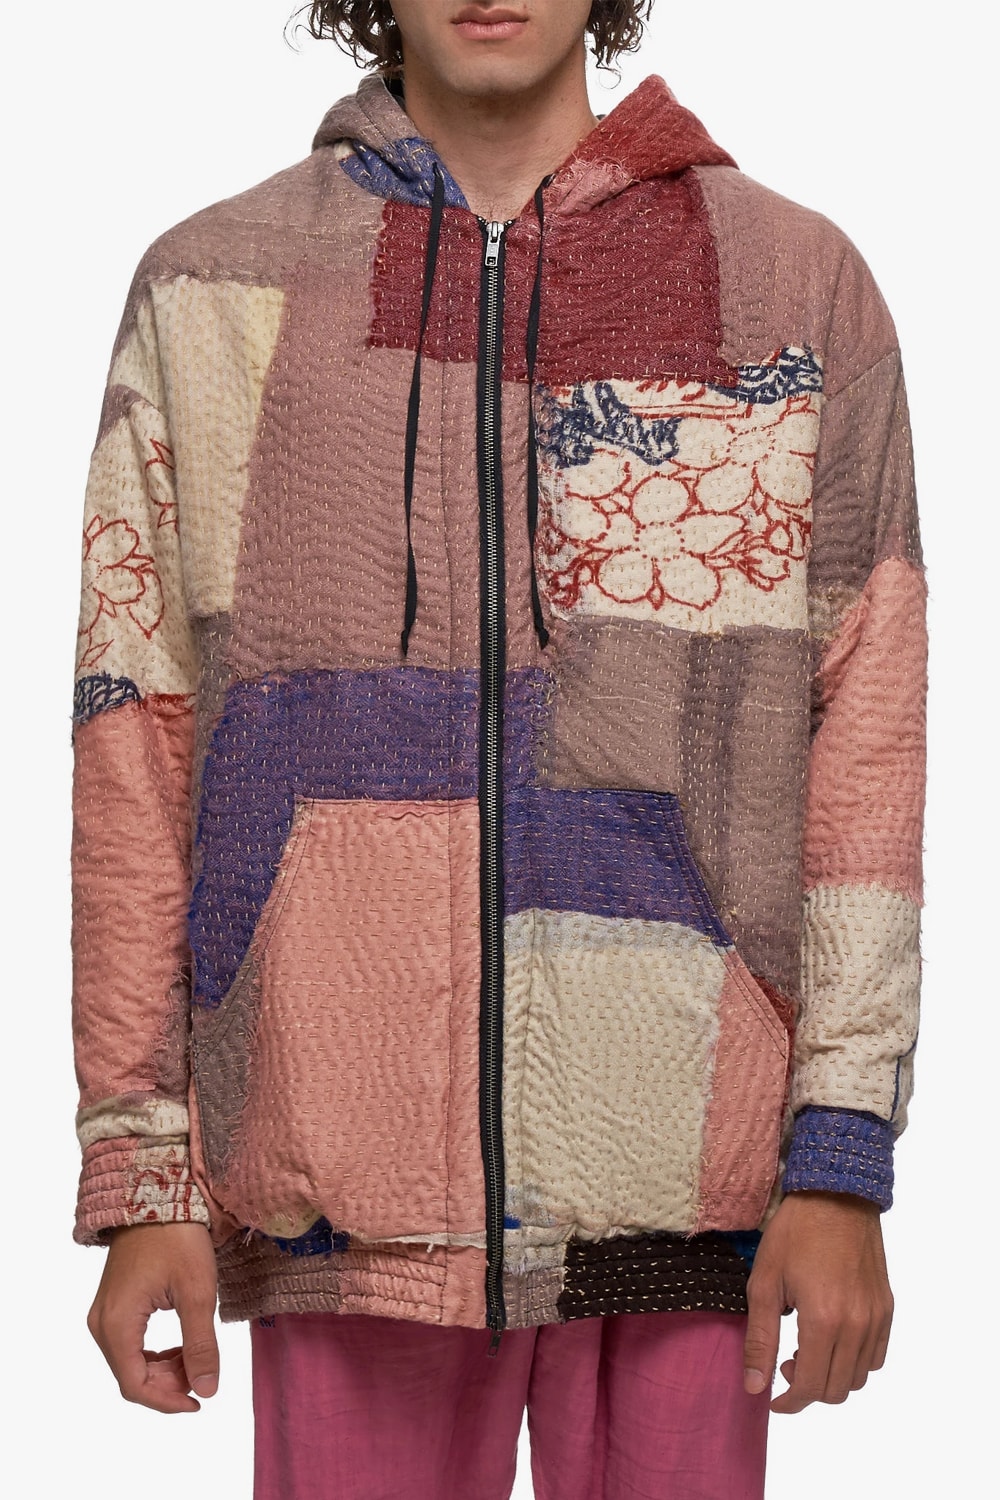 By Walid Releases New Patch Tricot Hayden Hoodies 250962M-PINK-MULTI 250962M-YELLOW-MULTI zip-up jacket sweatshirt drop date price release info made in england wool silk 